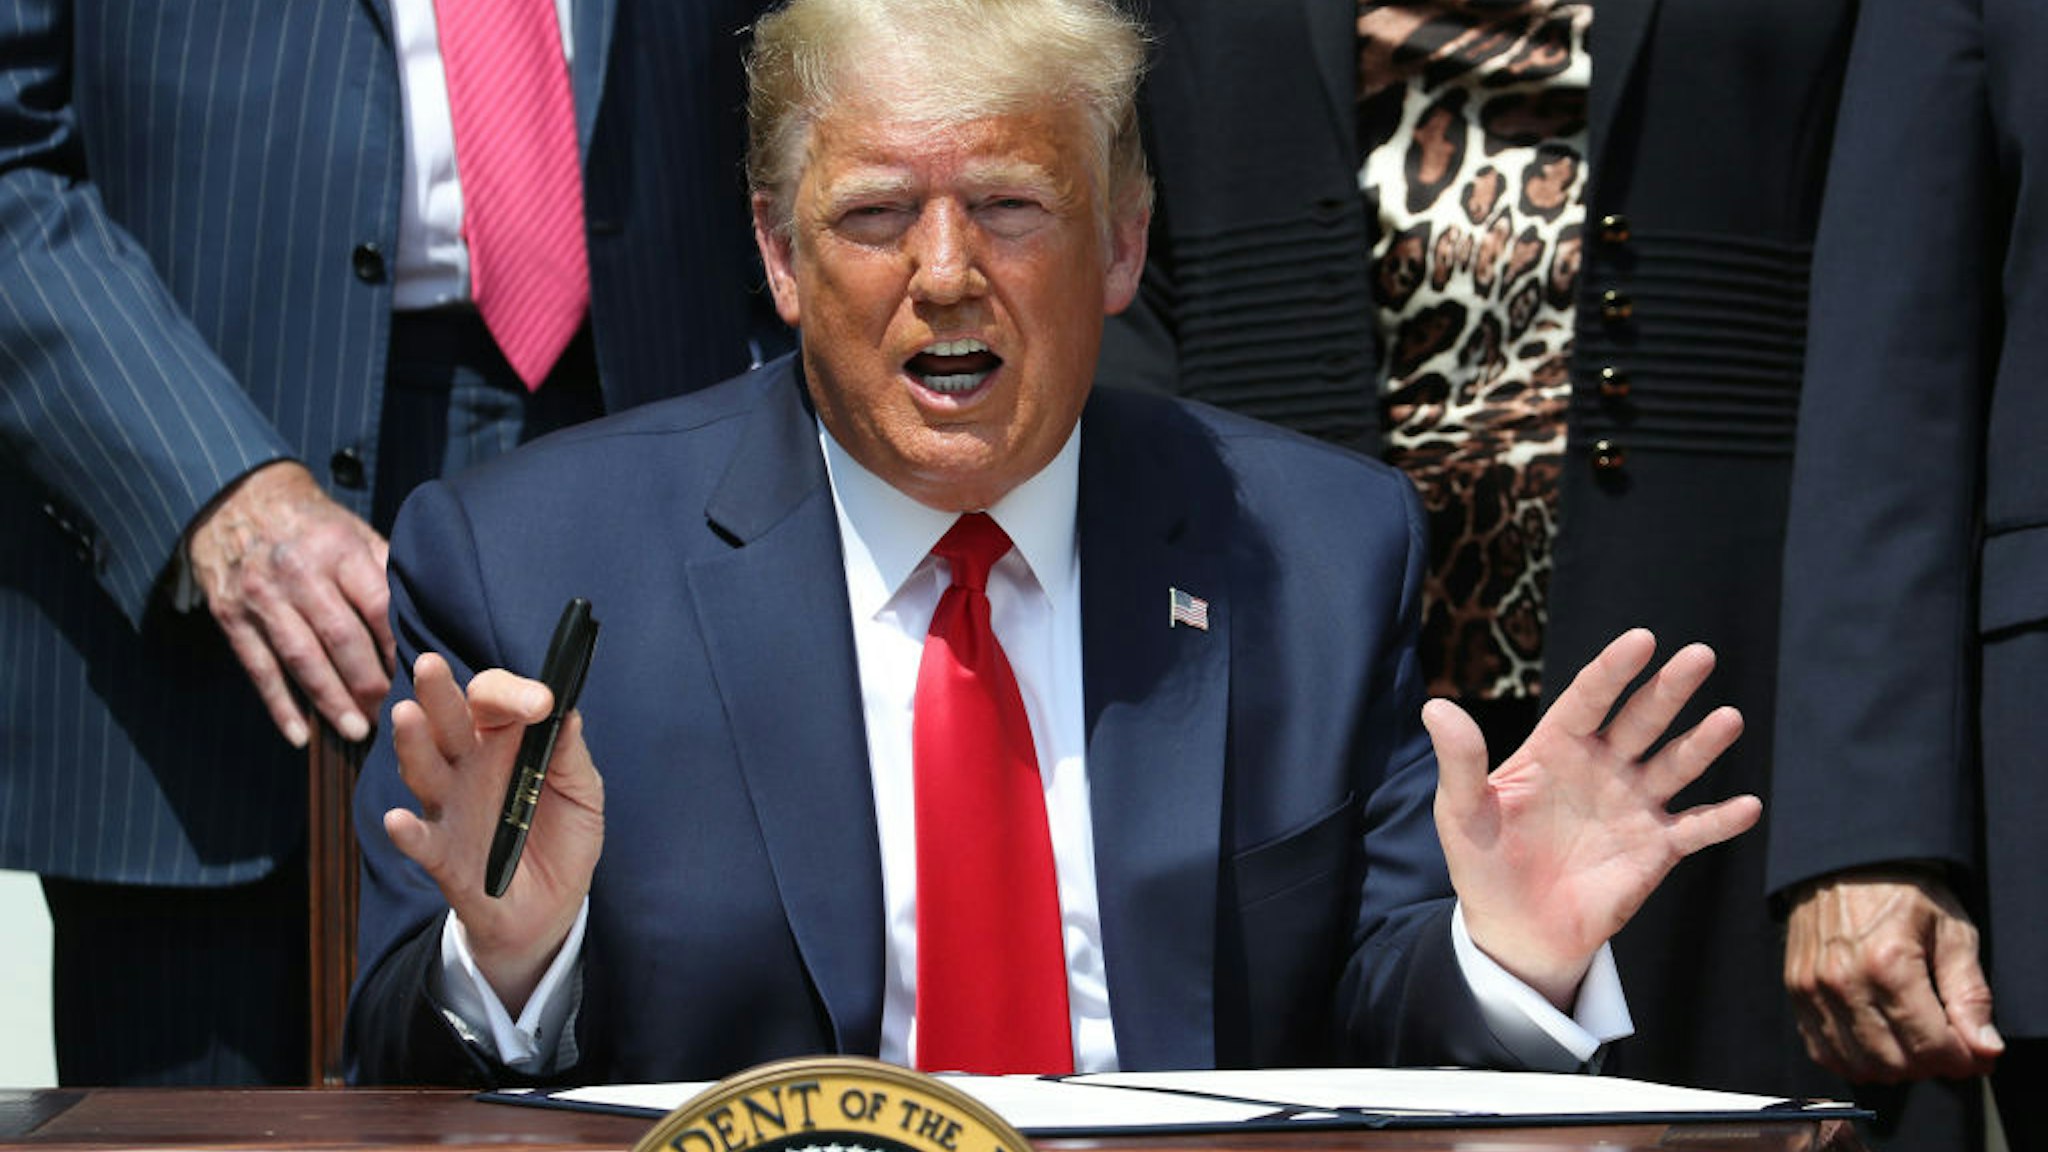 U.S. President Donald Trump speaks prepares to sign the Paycheck Protection Program Flexibility Act in the Rose Garden at the White House June 05, 2020 in Washington, DC.